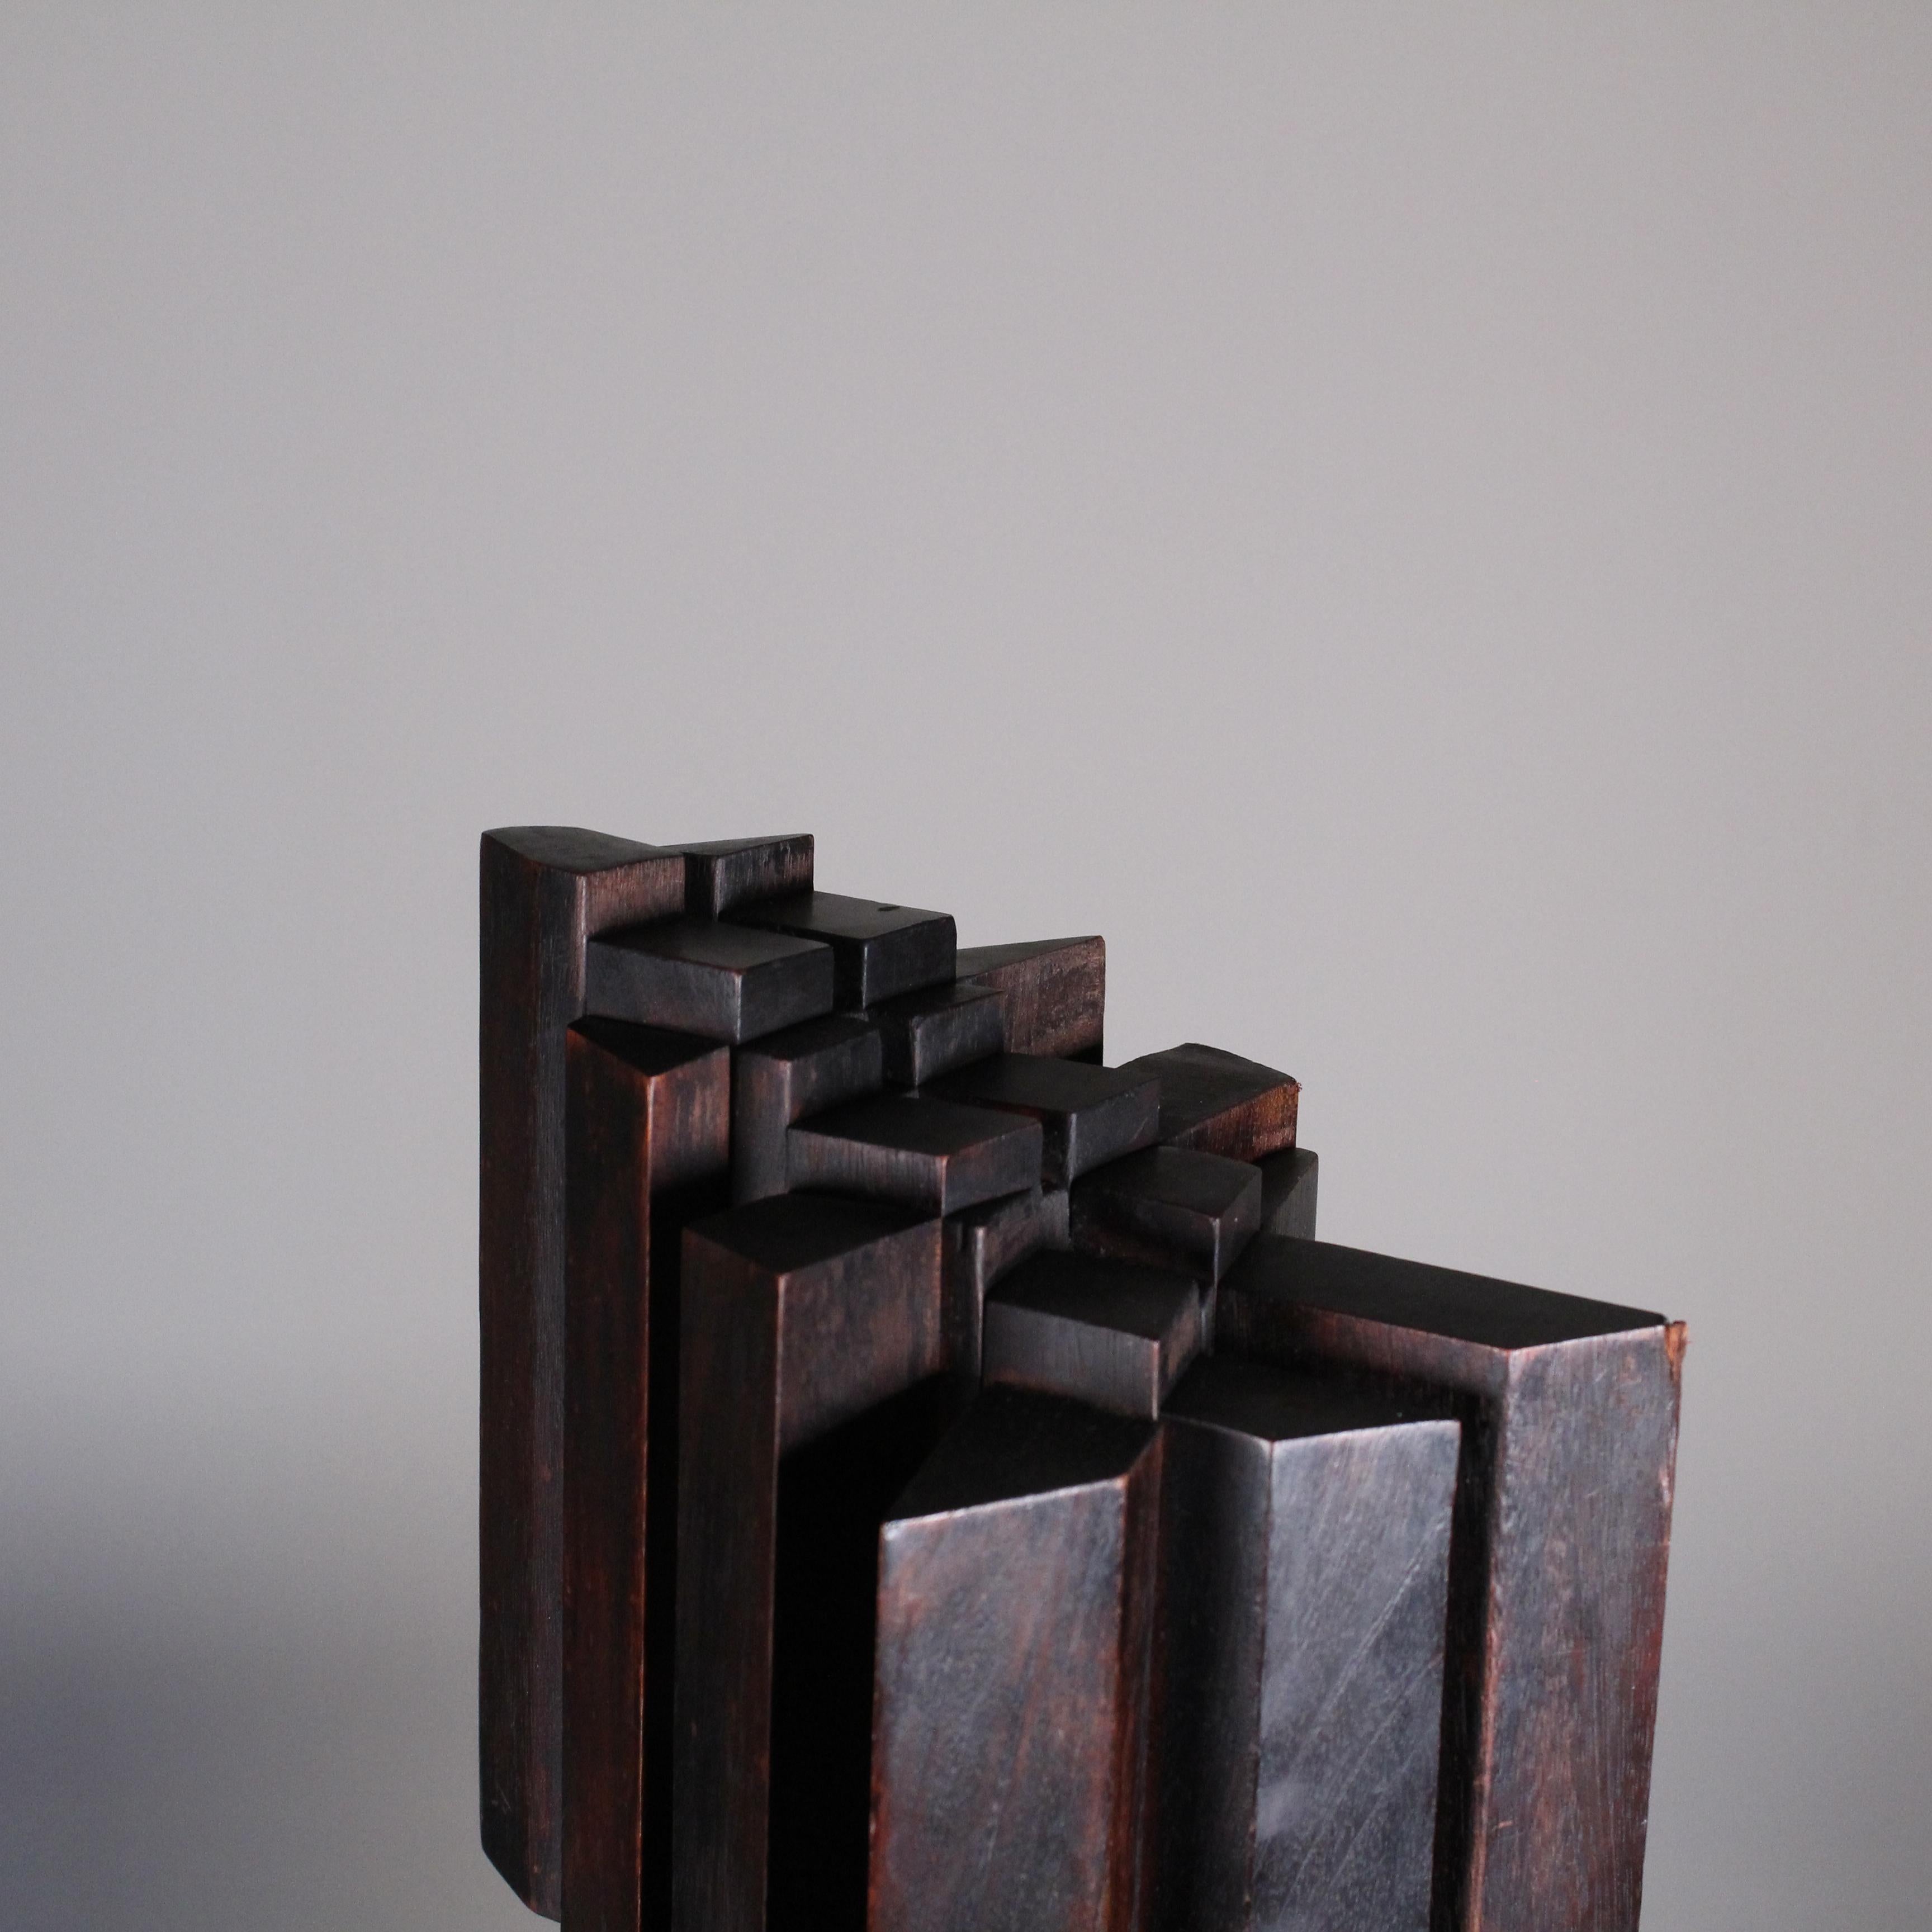 Kinetic Wood sculpture by Ben Ormenese For Sale